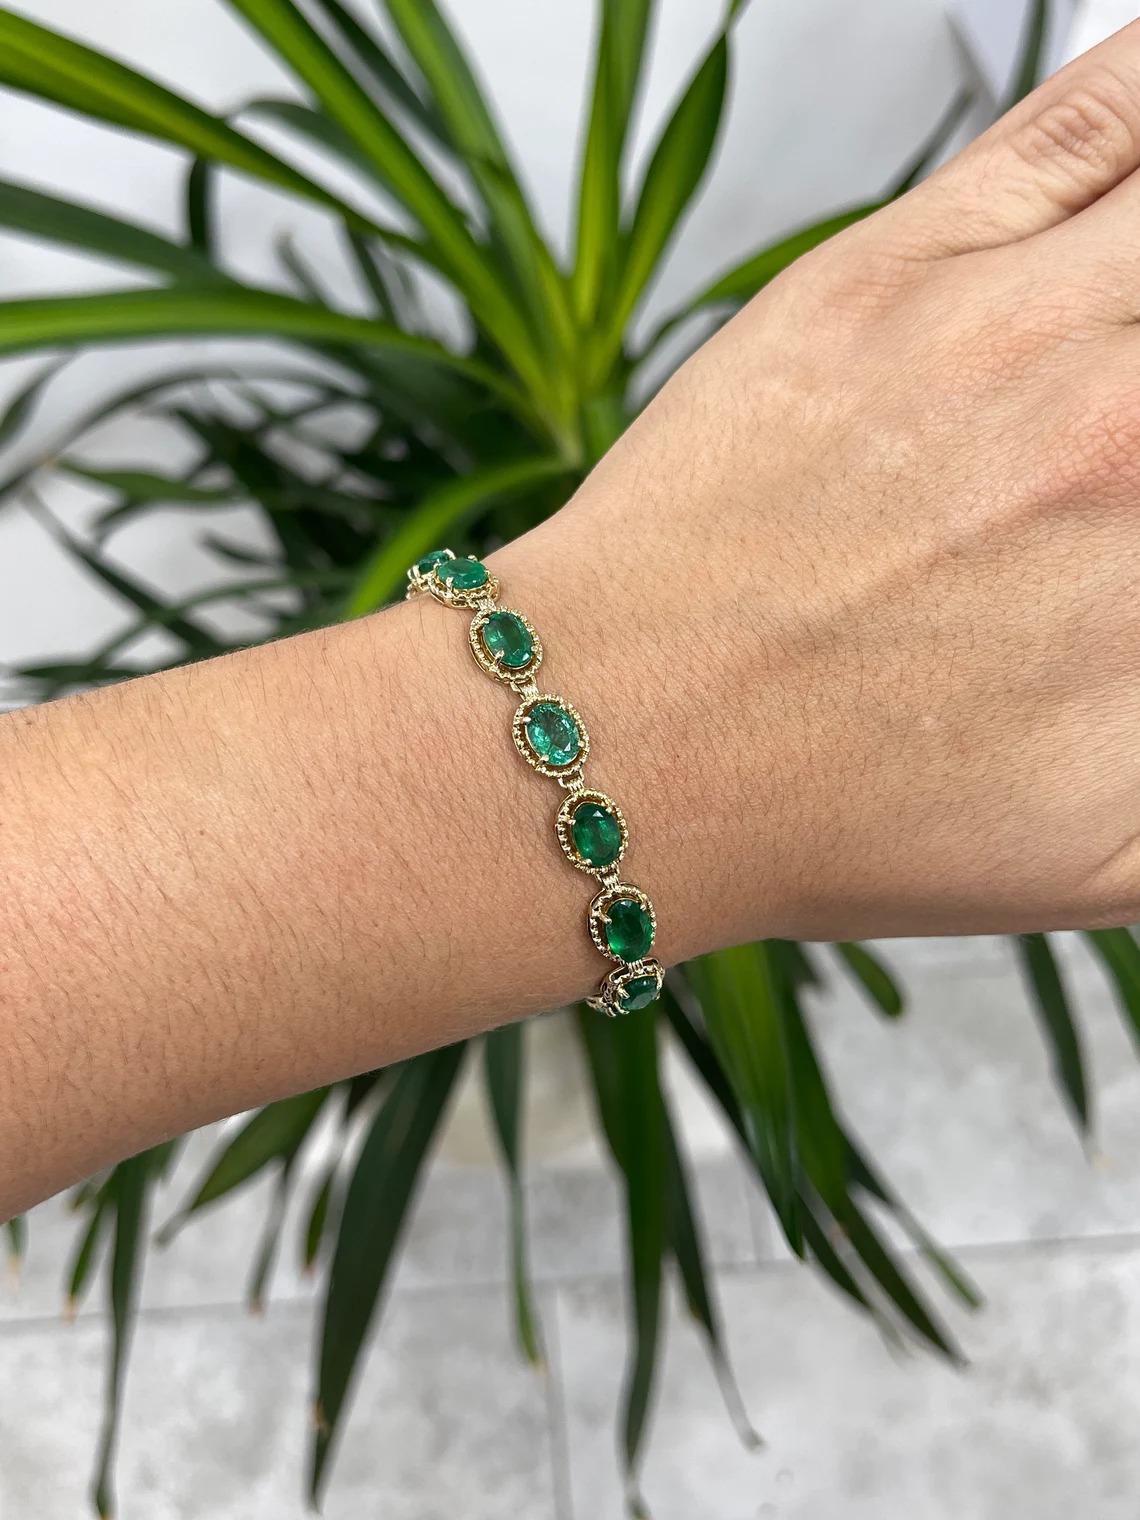 Behold this one-of-a-kind treasure! This classical natural multi emerald bracelet is remarkable in every way possible. It features fourteen different oval-cut emeralds all varying in color, clarity, and luster; they all share in common its rich